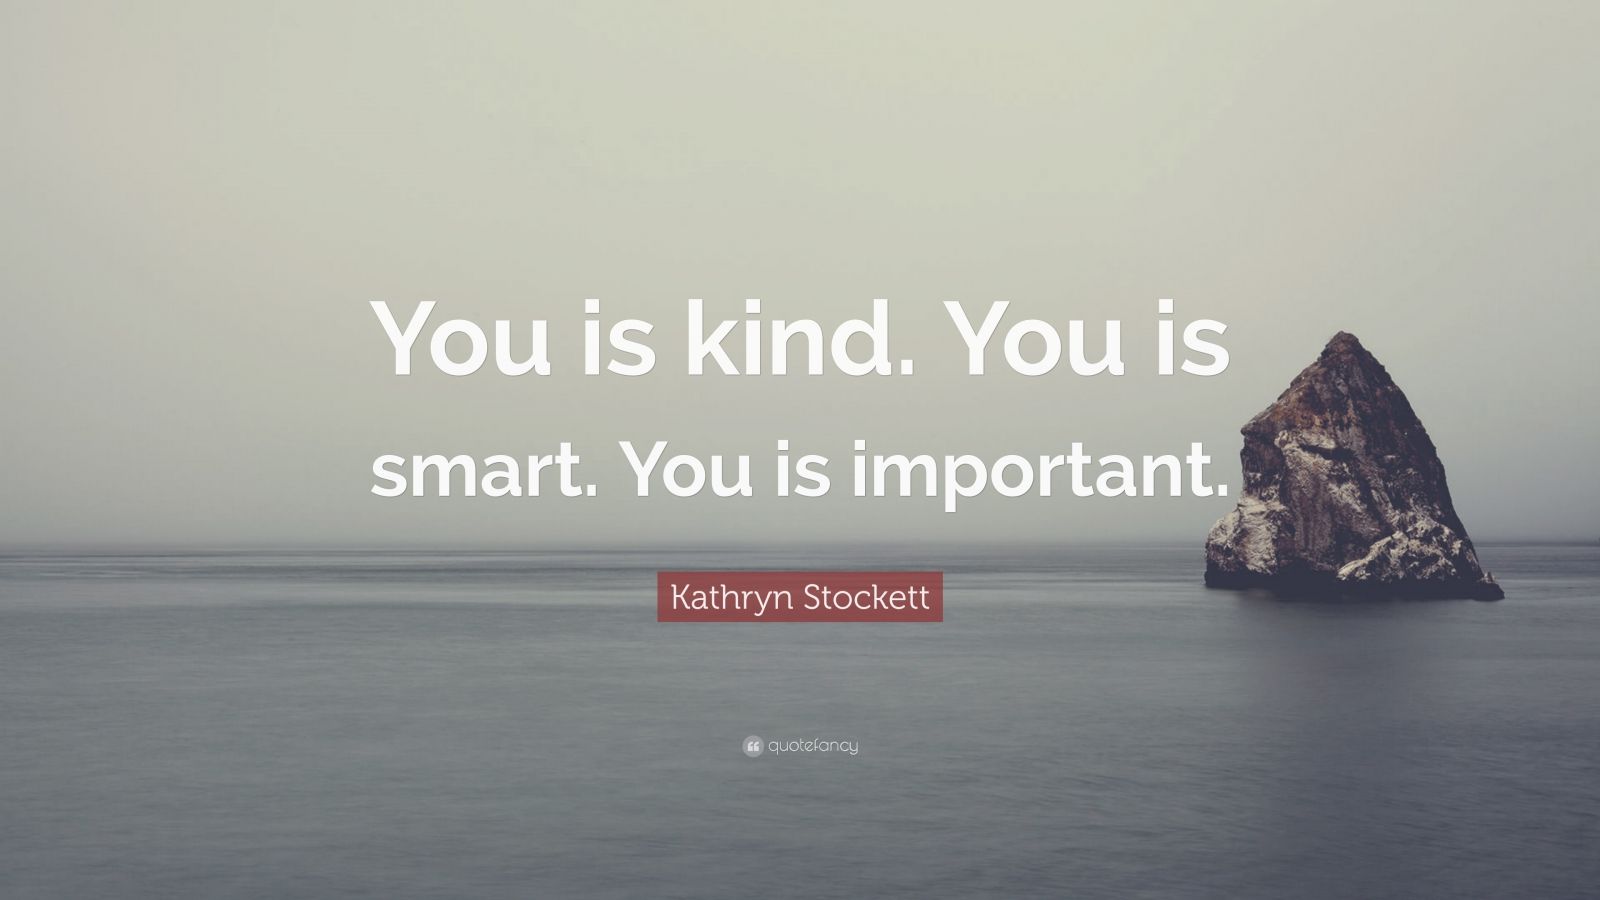 Kathryn Stockett Quote: "You is kind. You is smart. You is important." (12 wallpapers) - Quotefancy